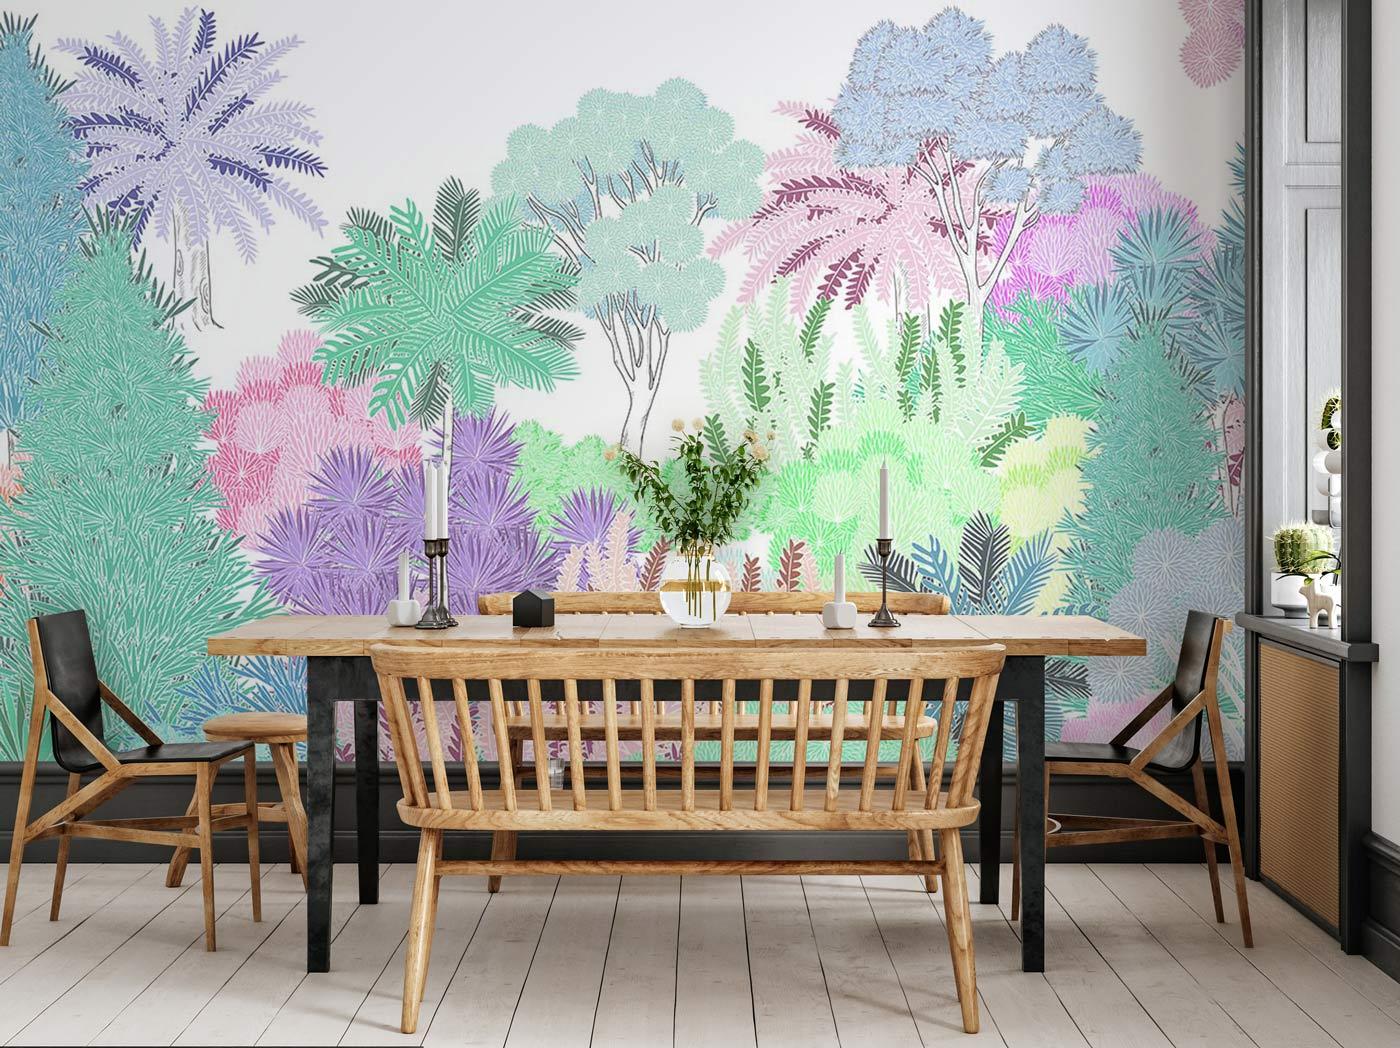 Free download Classic dining room wall murals design ideas best wall murals  and 1280x960 for your Desktop Mobile  Tablet  Explore 46 Classical Wallpaper  Murals  Classical Music Wallpaper Classical Wallpaper